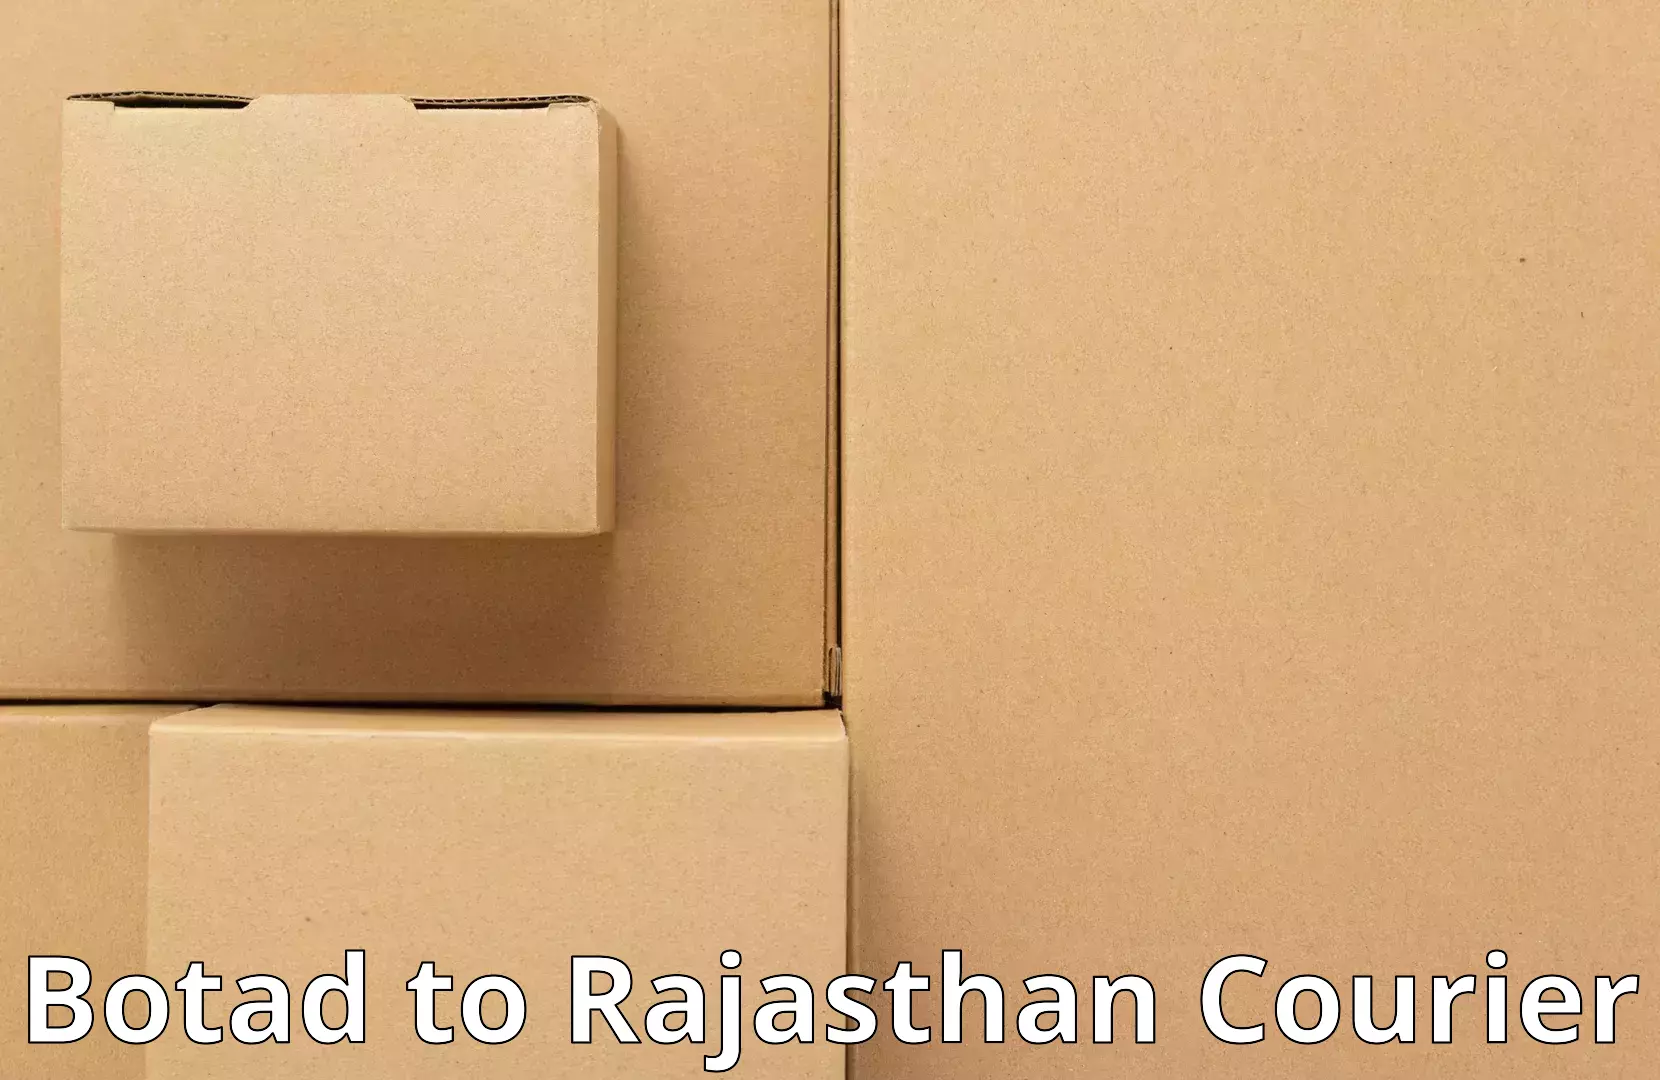 Quality relocation services in Botad to Bhawani Mandi